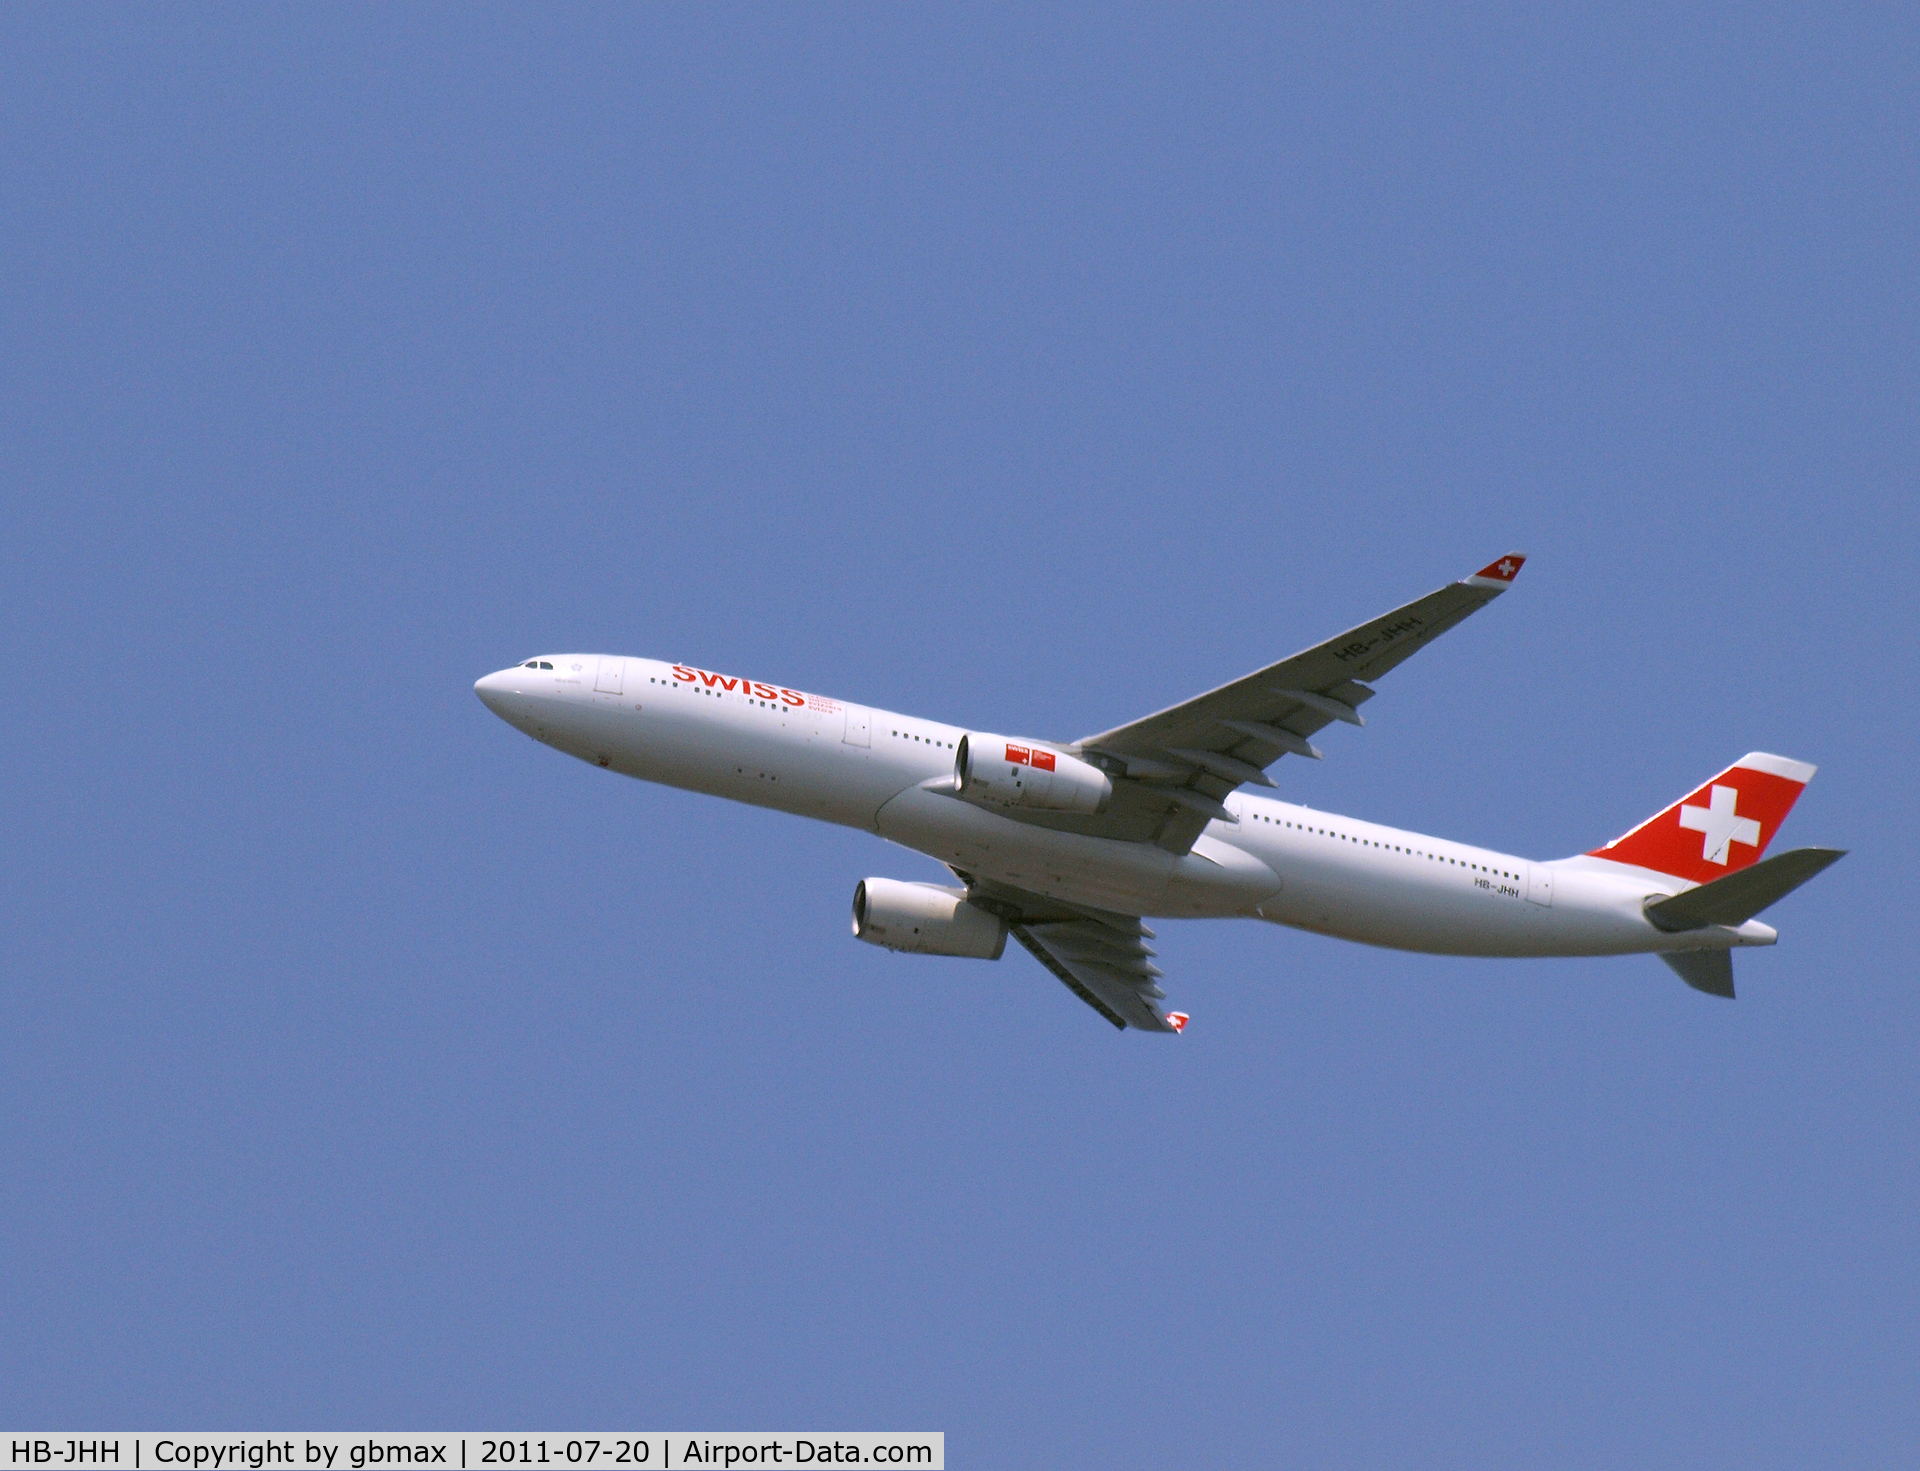 HB-JHH, 2010 Airbus A330-343X C/N 1145, Going @ ~3,500 feet to a landing at JFK